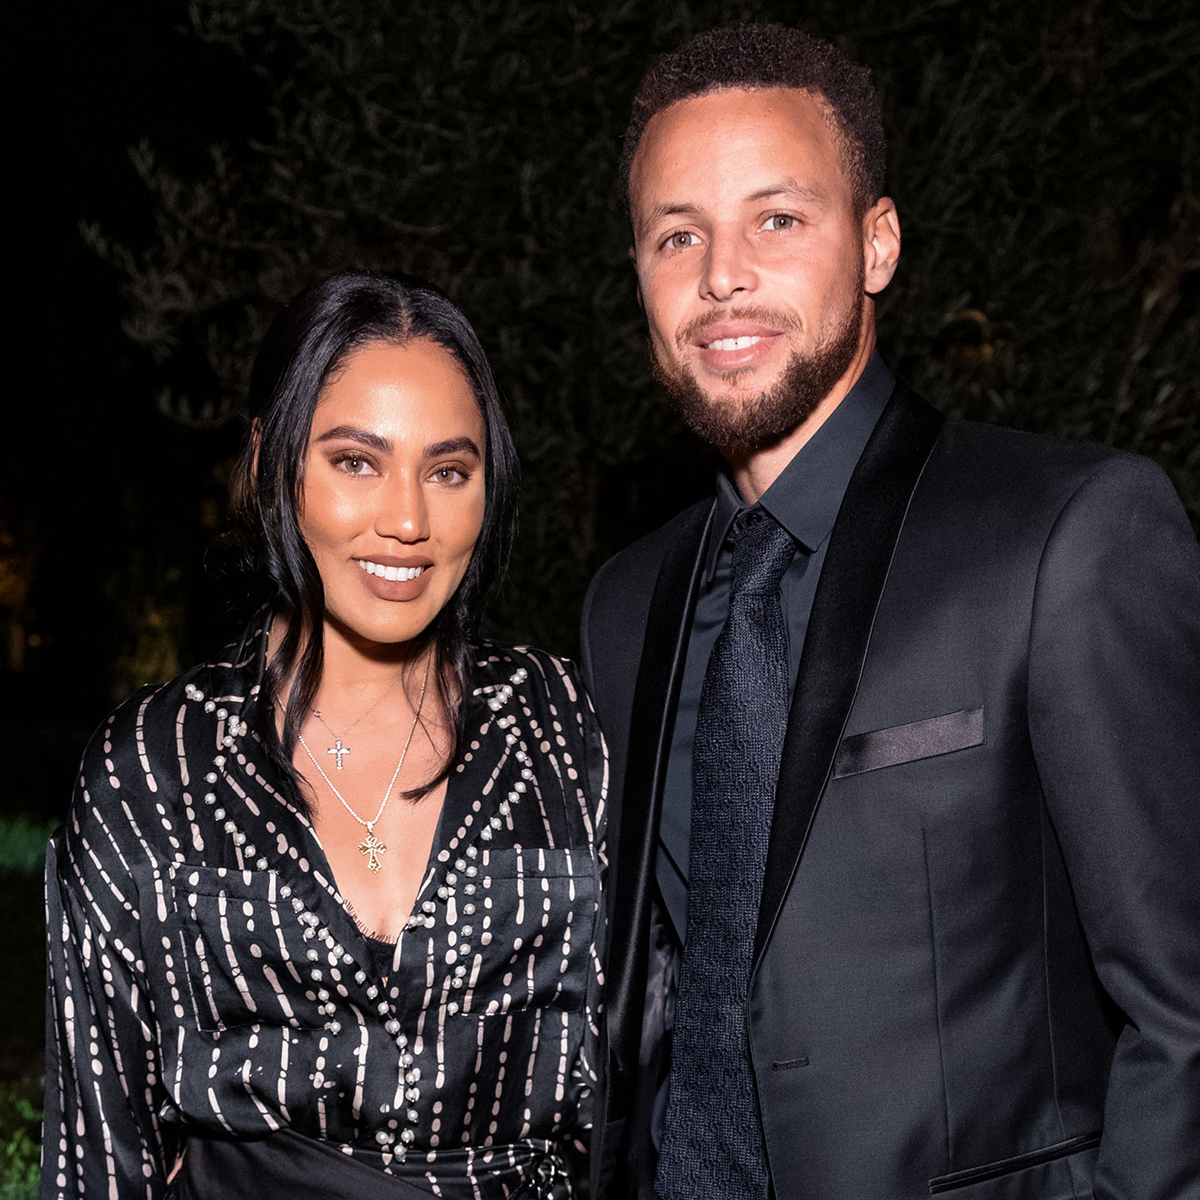 Get Them Together': Ayesha Curry Claps Back at Troll Who Criticized Her  Body, and Fans Praise Her For It